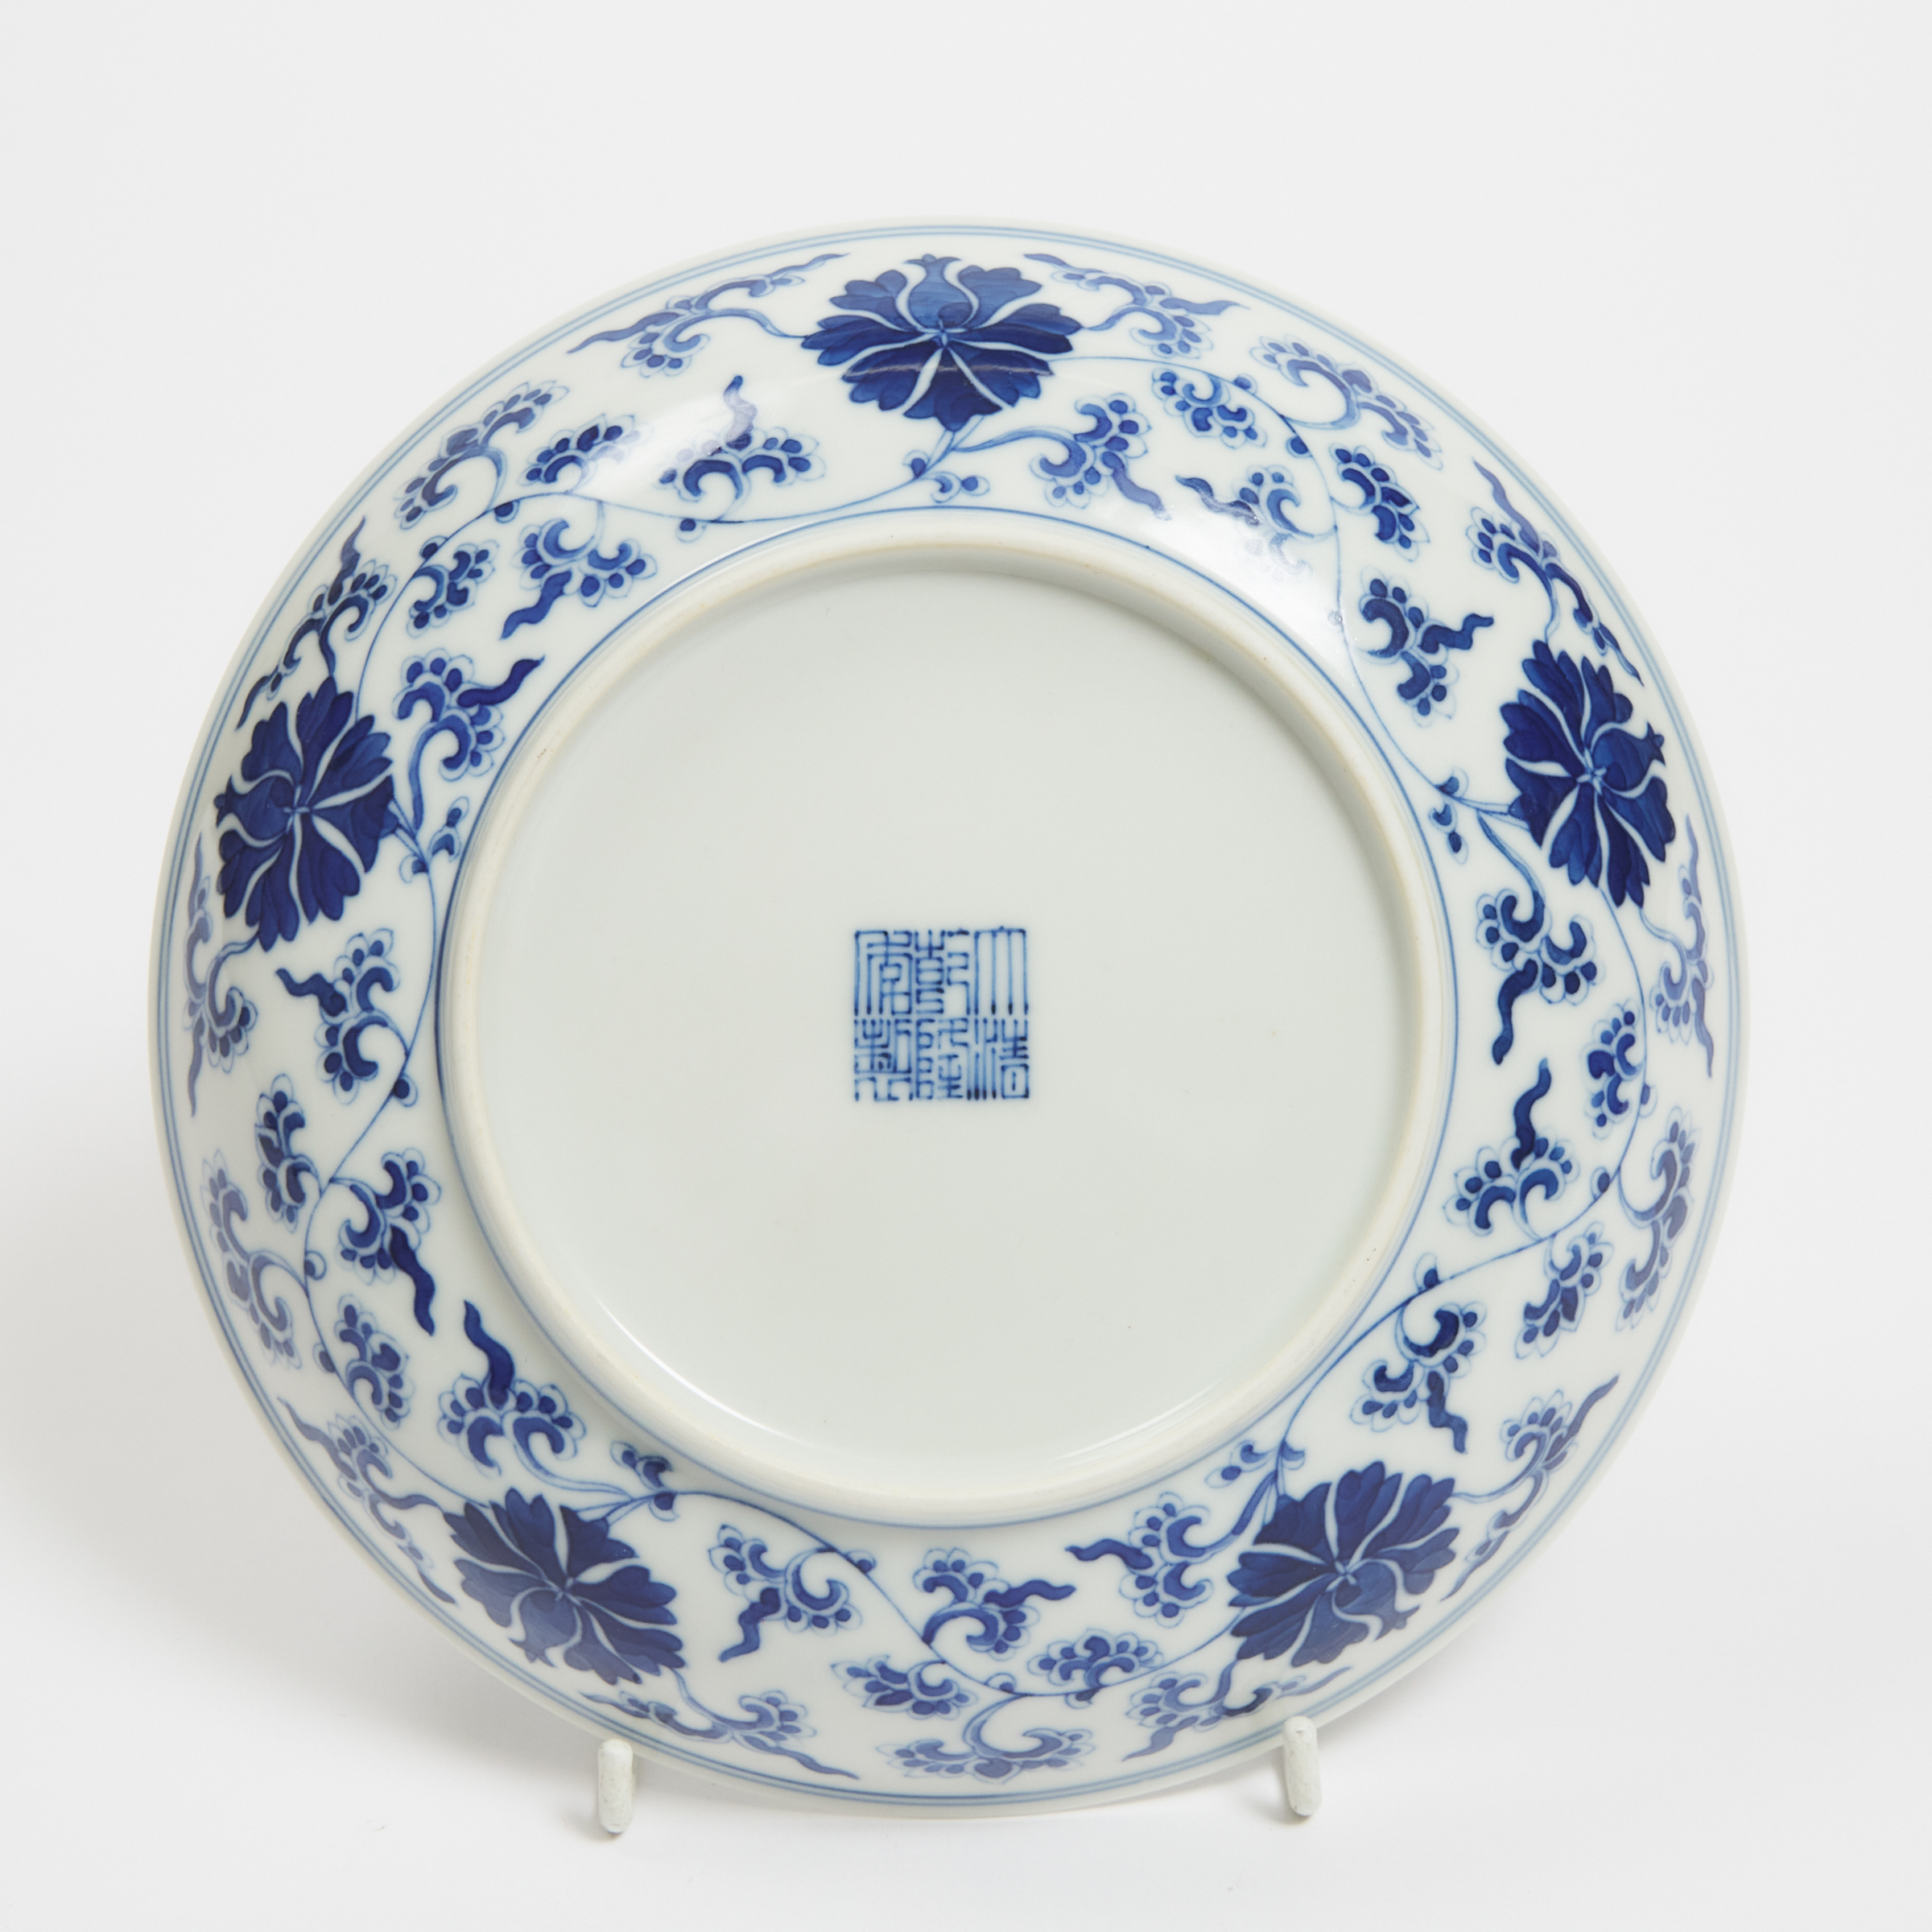 A Blue and White 'Lotus' Dish, Qianlong Mark and Period (1736-1795)